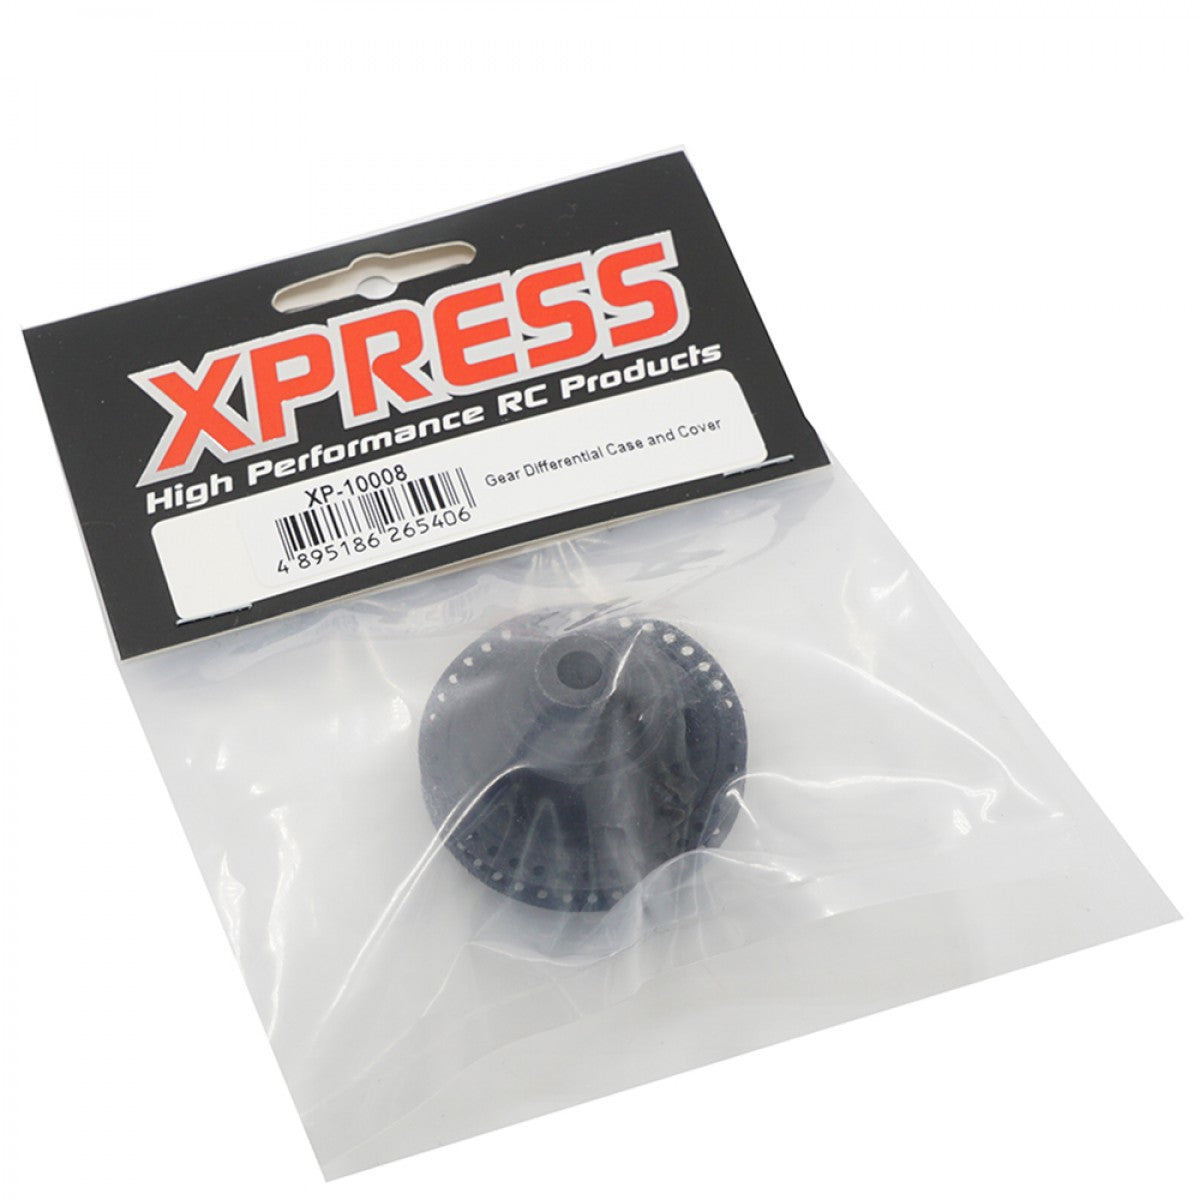 Xpress XP-10008 XQ1 Gear Differential Case and Cover